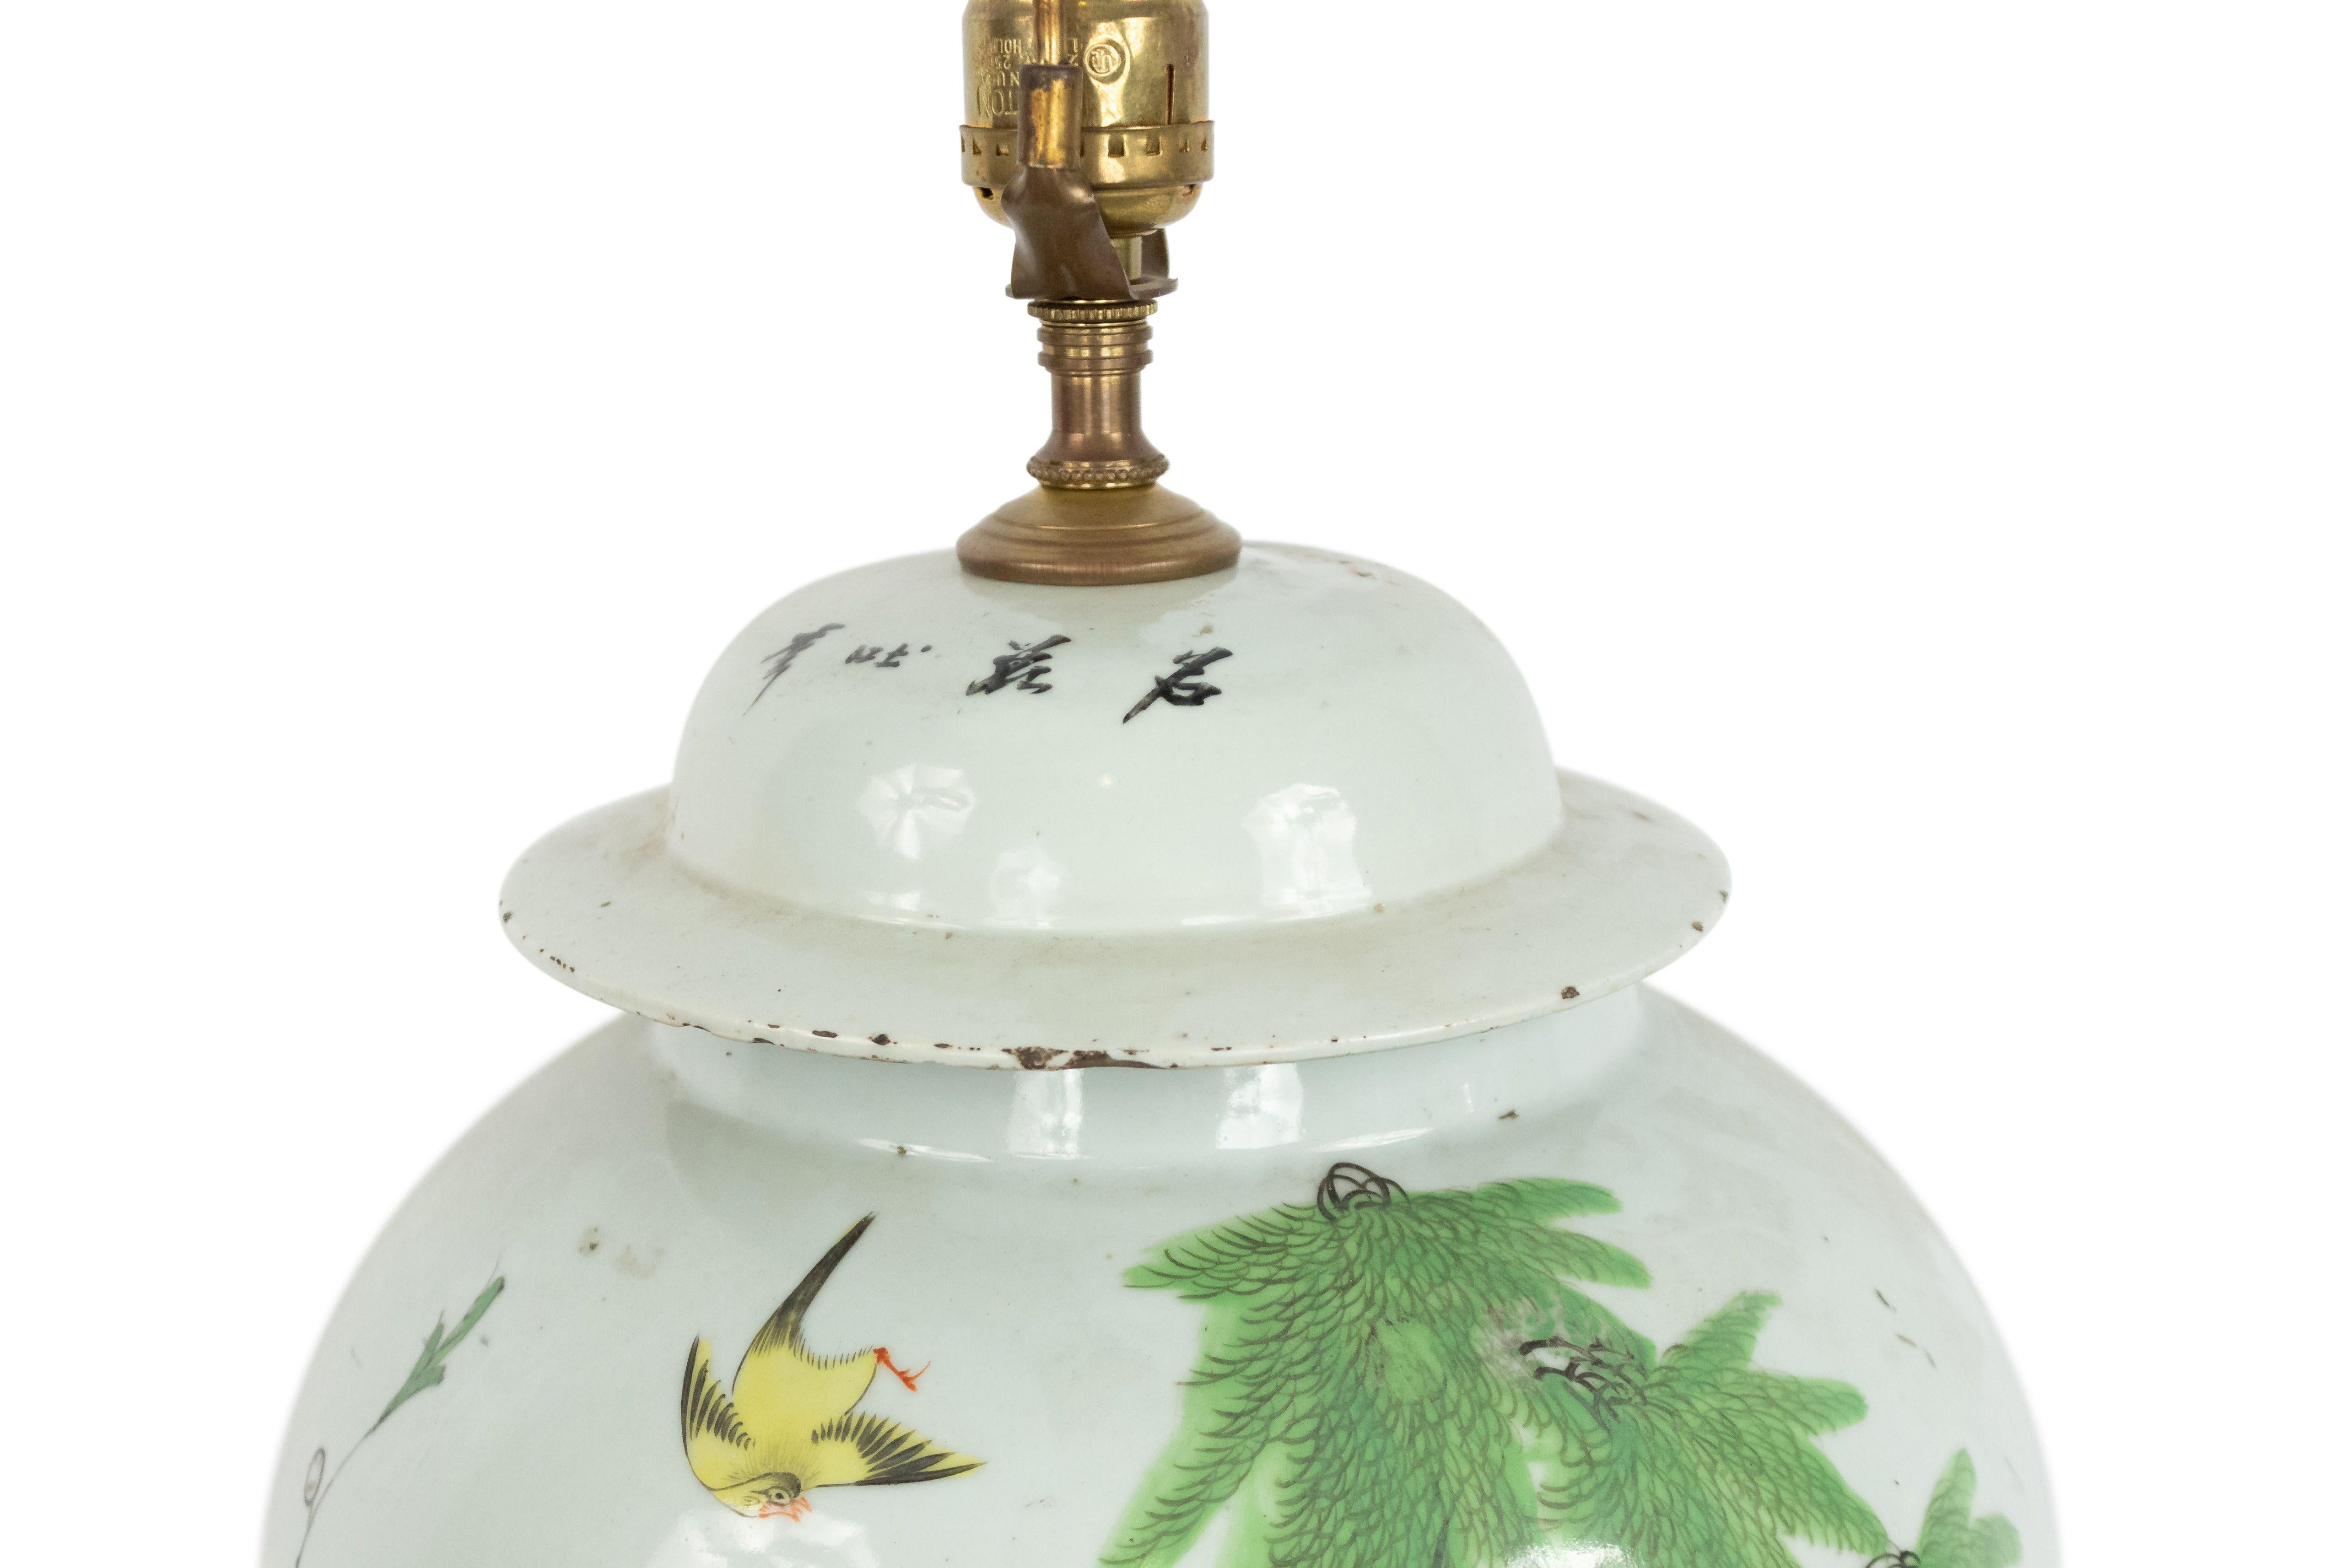 Asian Chinese style 19th Century white porcelain ginger jar form lamp with foliate & bird details mounted on a round wood base.